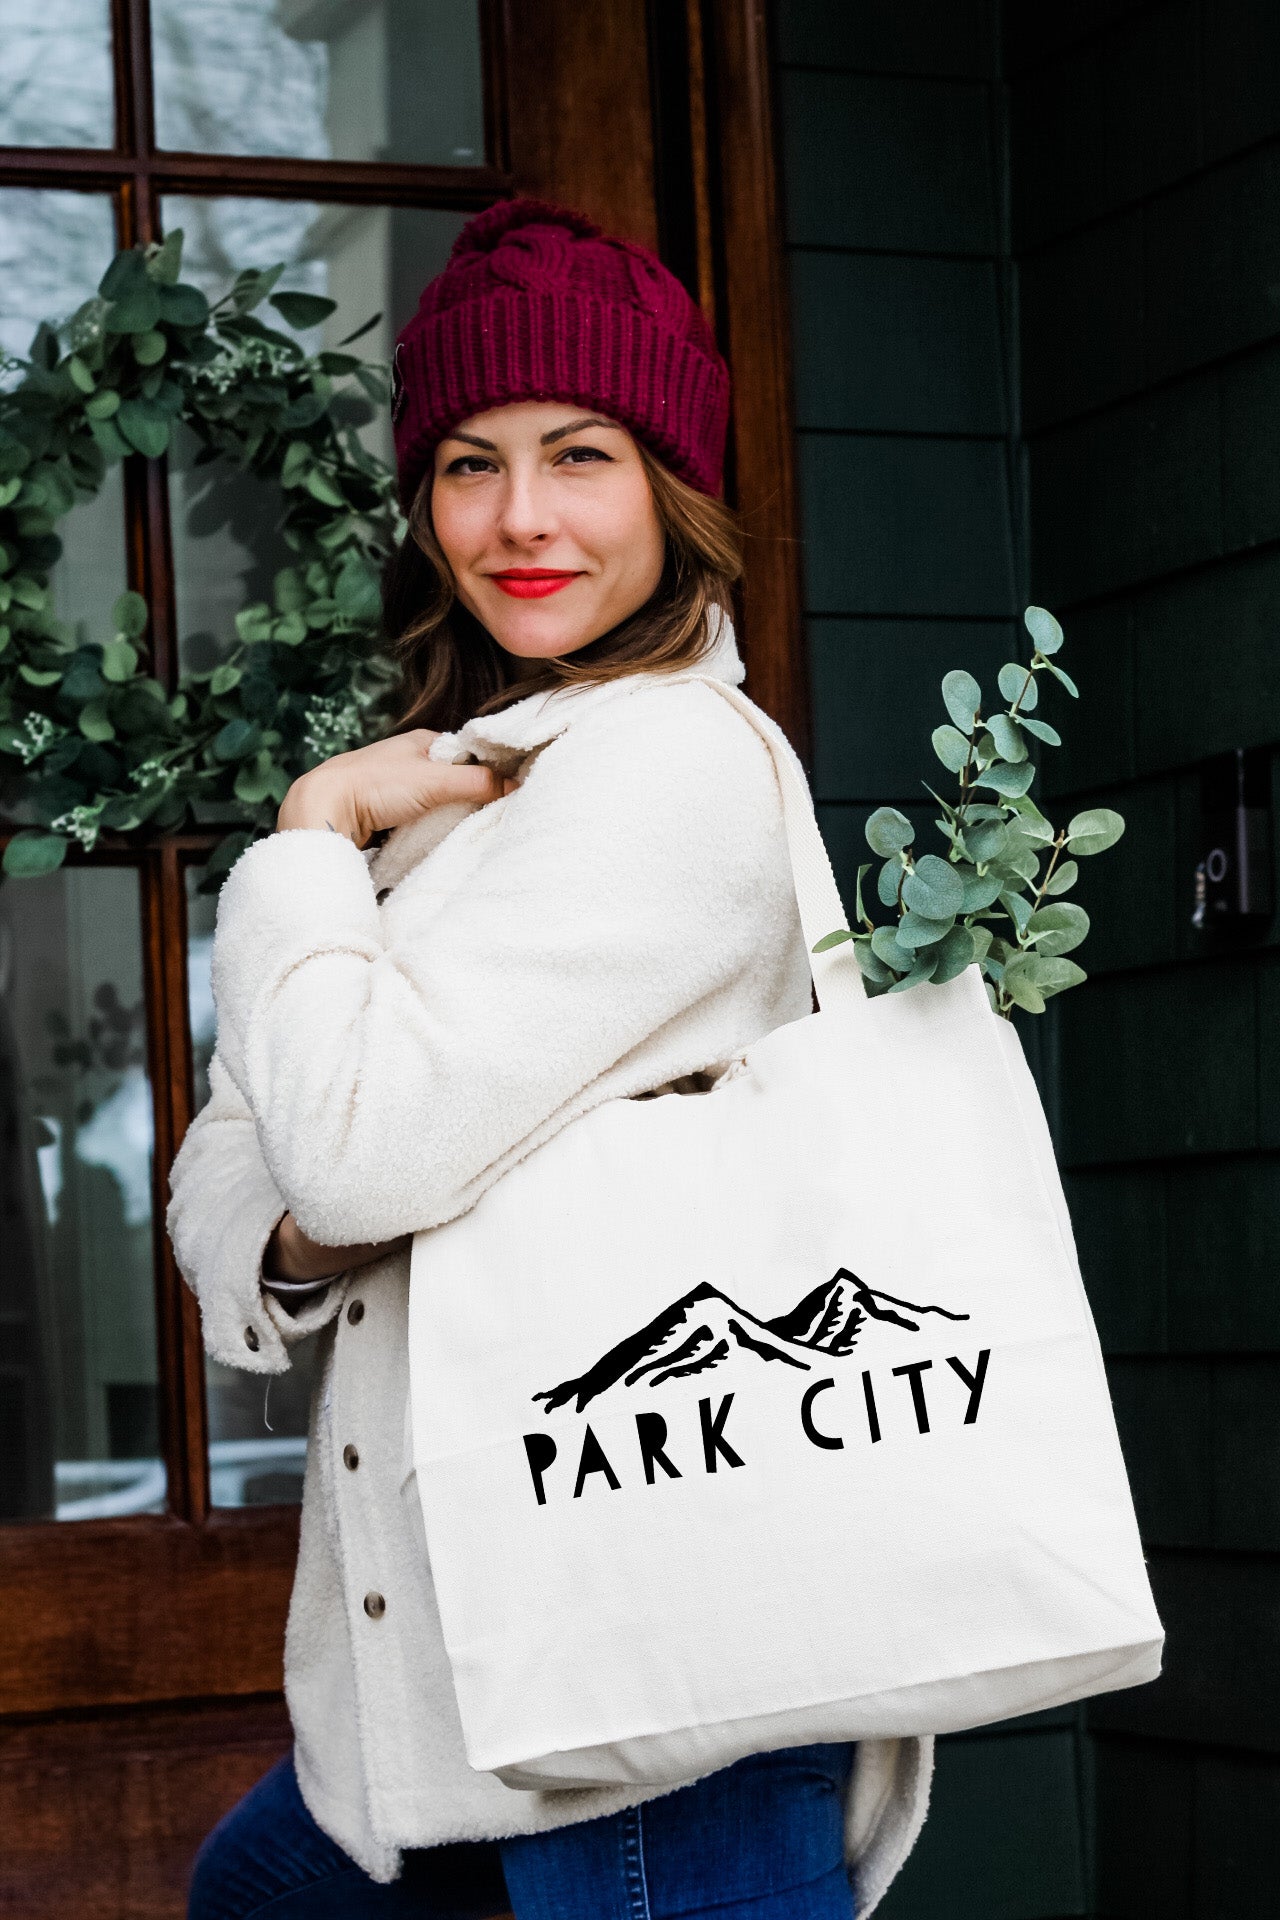 a woman carrying a white bag that says park city